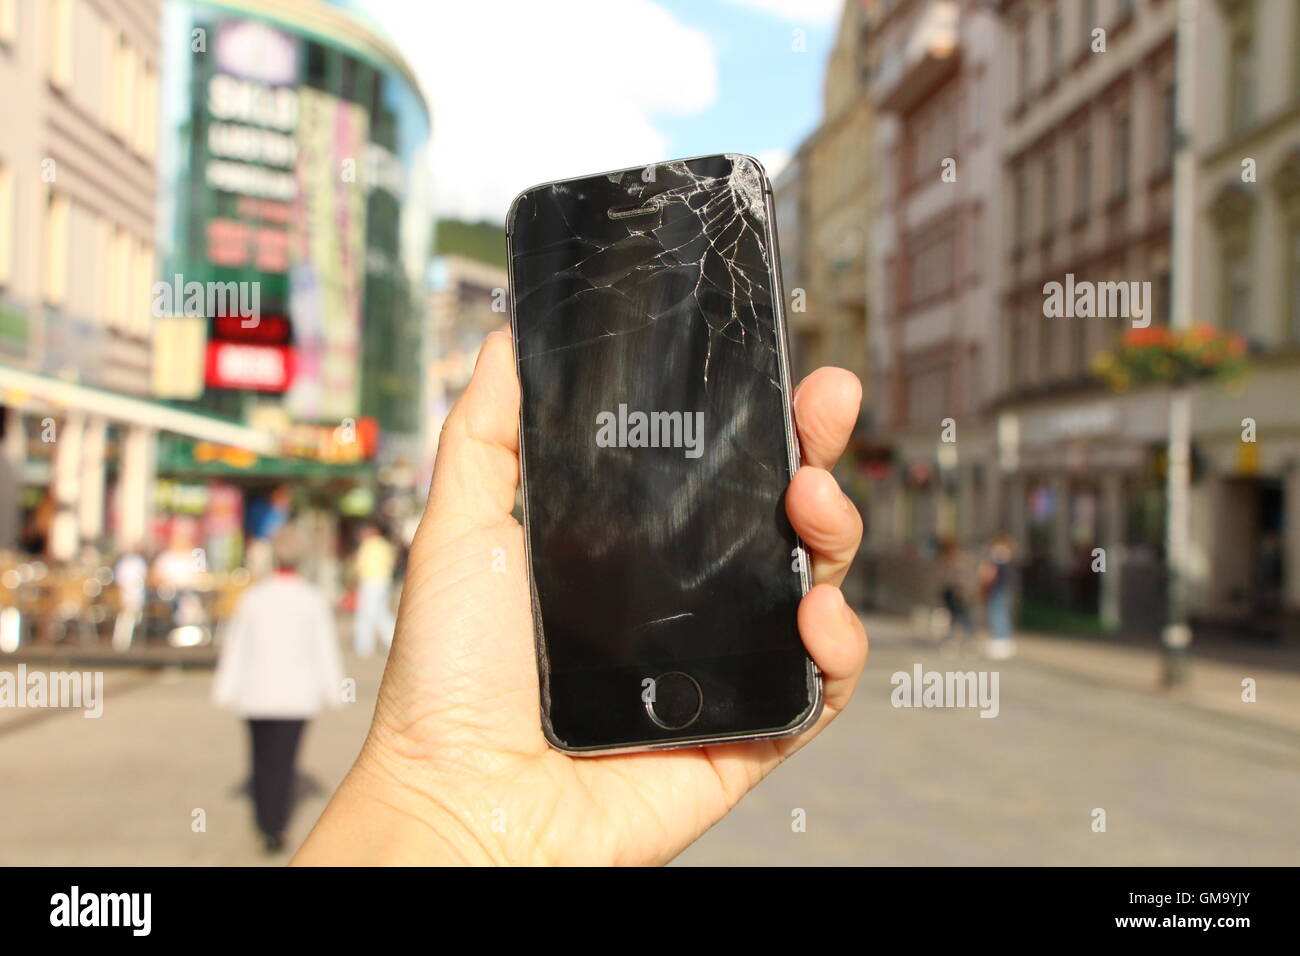 This iPhone5 by Apple is damaged and thus it does not work. Stock Photo